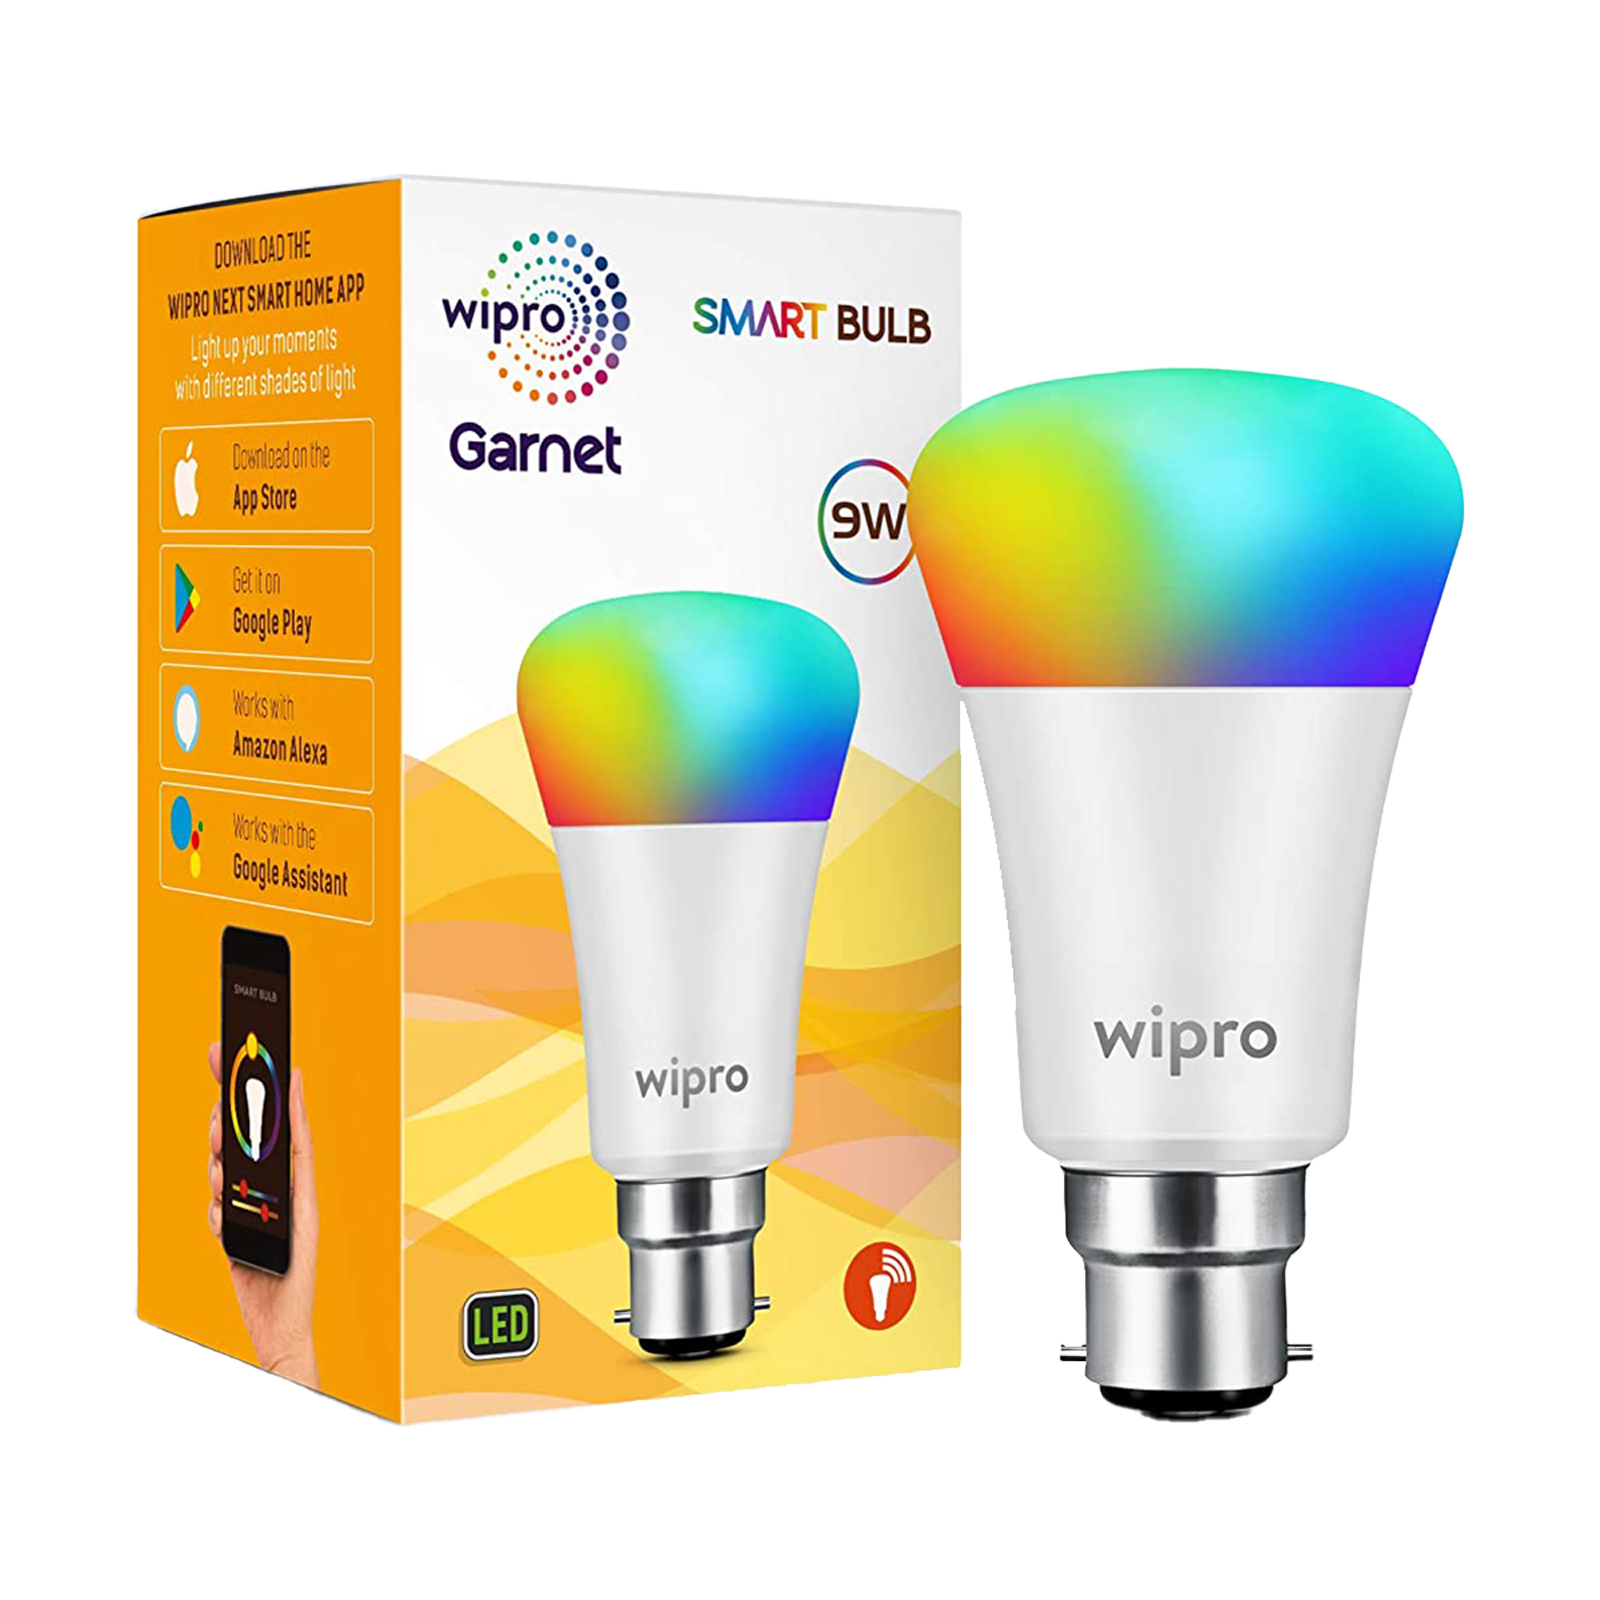 Wipro 9 Watts Electric Powered Smart LED Bulb (810 Lumens, NS9300, Multicolor)_1